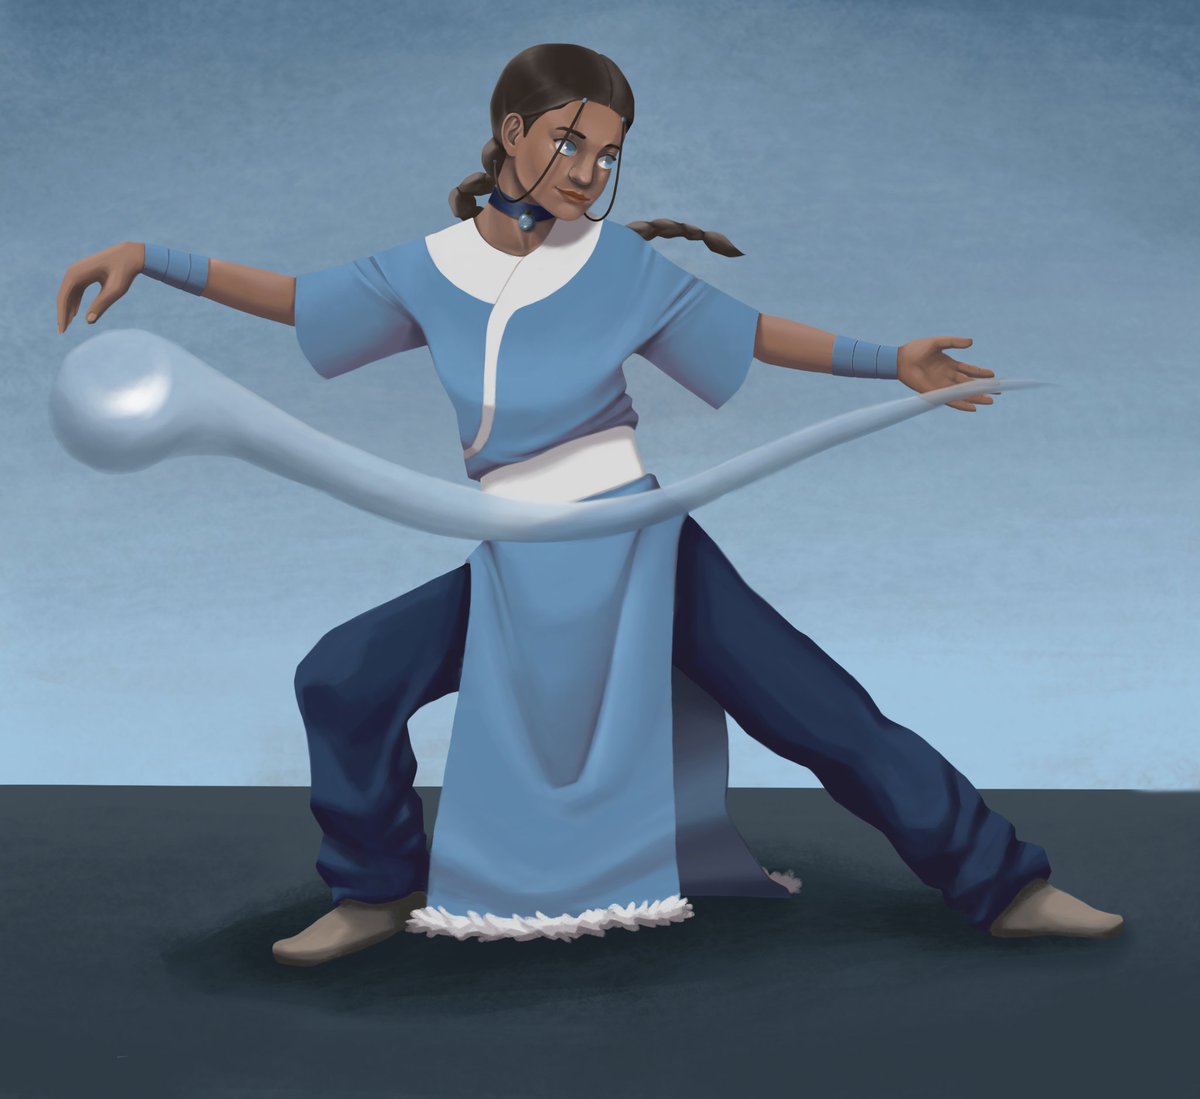 An older attempt at painting Katara in an "action" waterbending p...